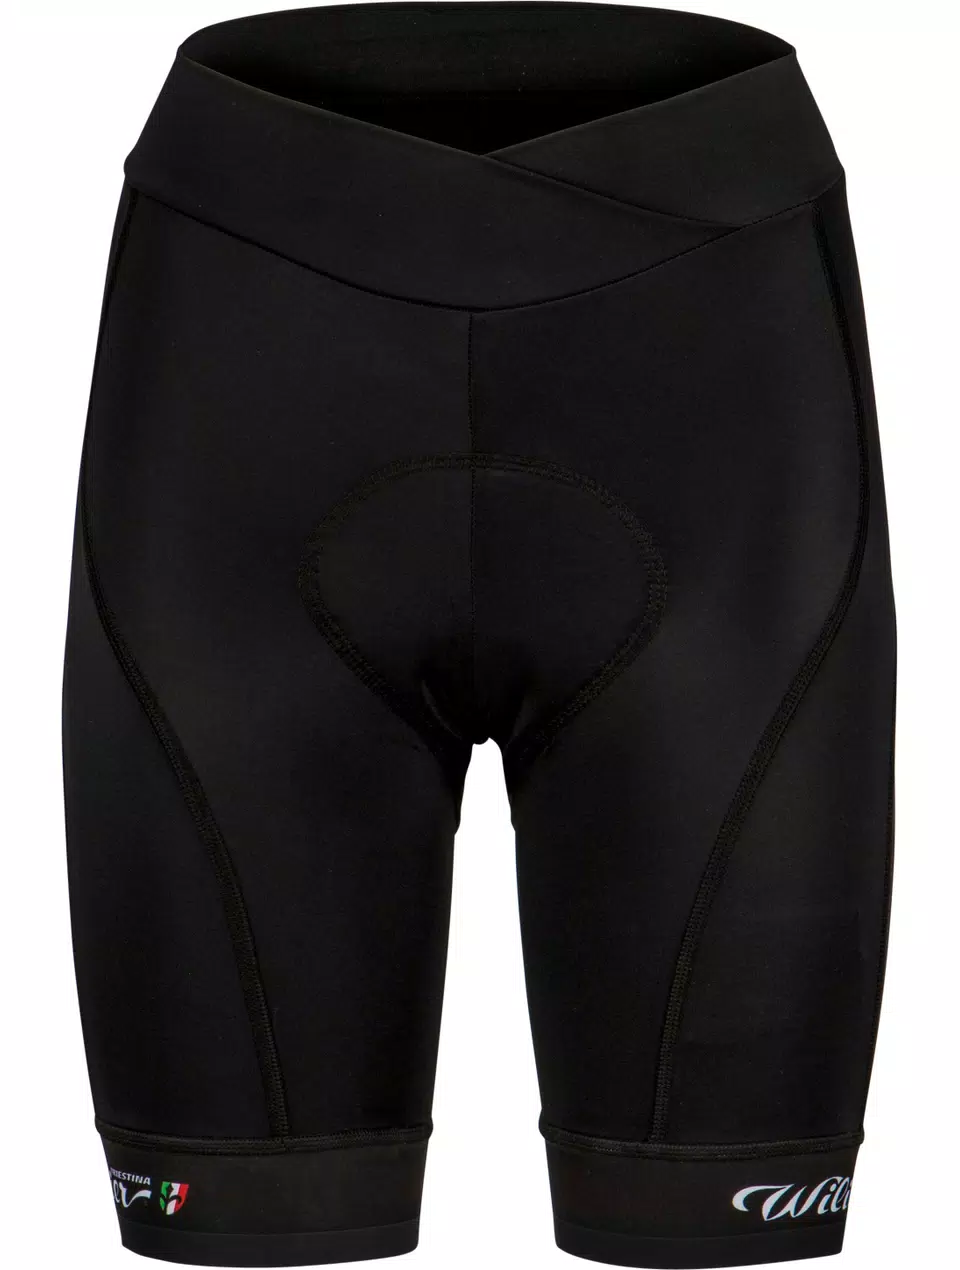 Culotte mujer Wilier Cycling Club